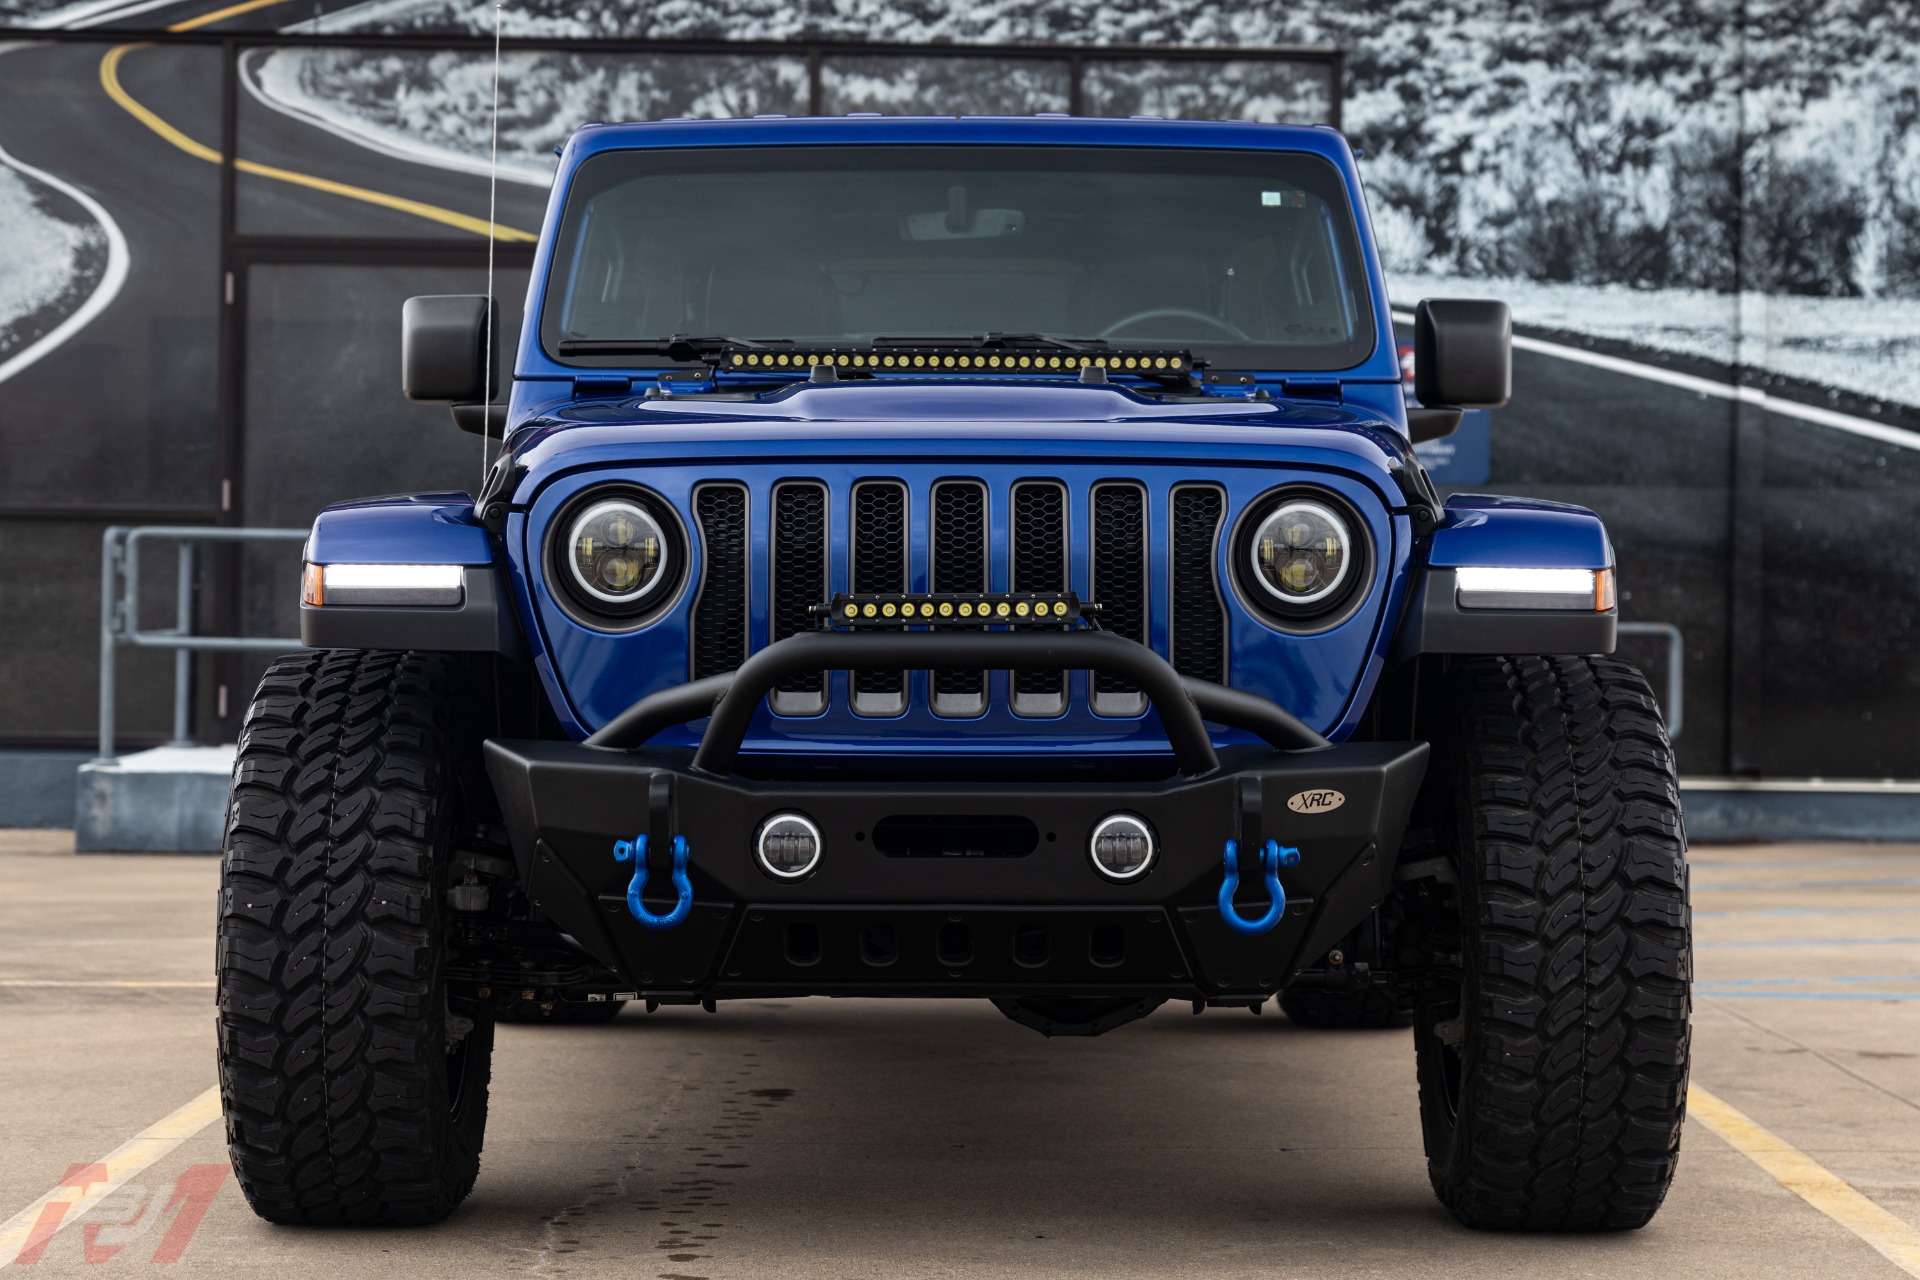 Used-2018-Jeep-Wrangler-Unlimited-Rubicon